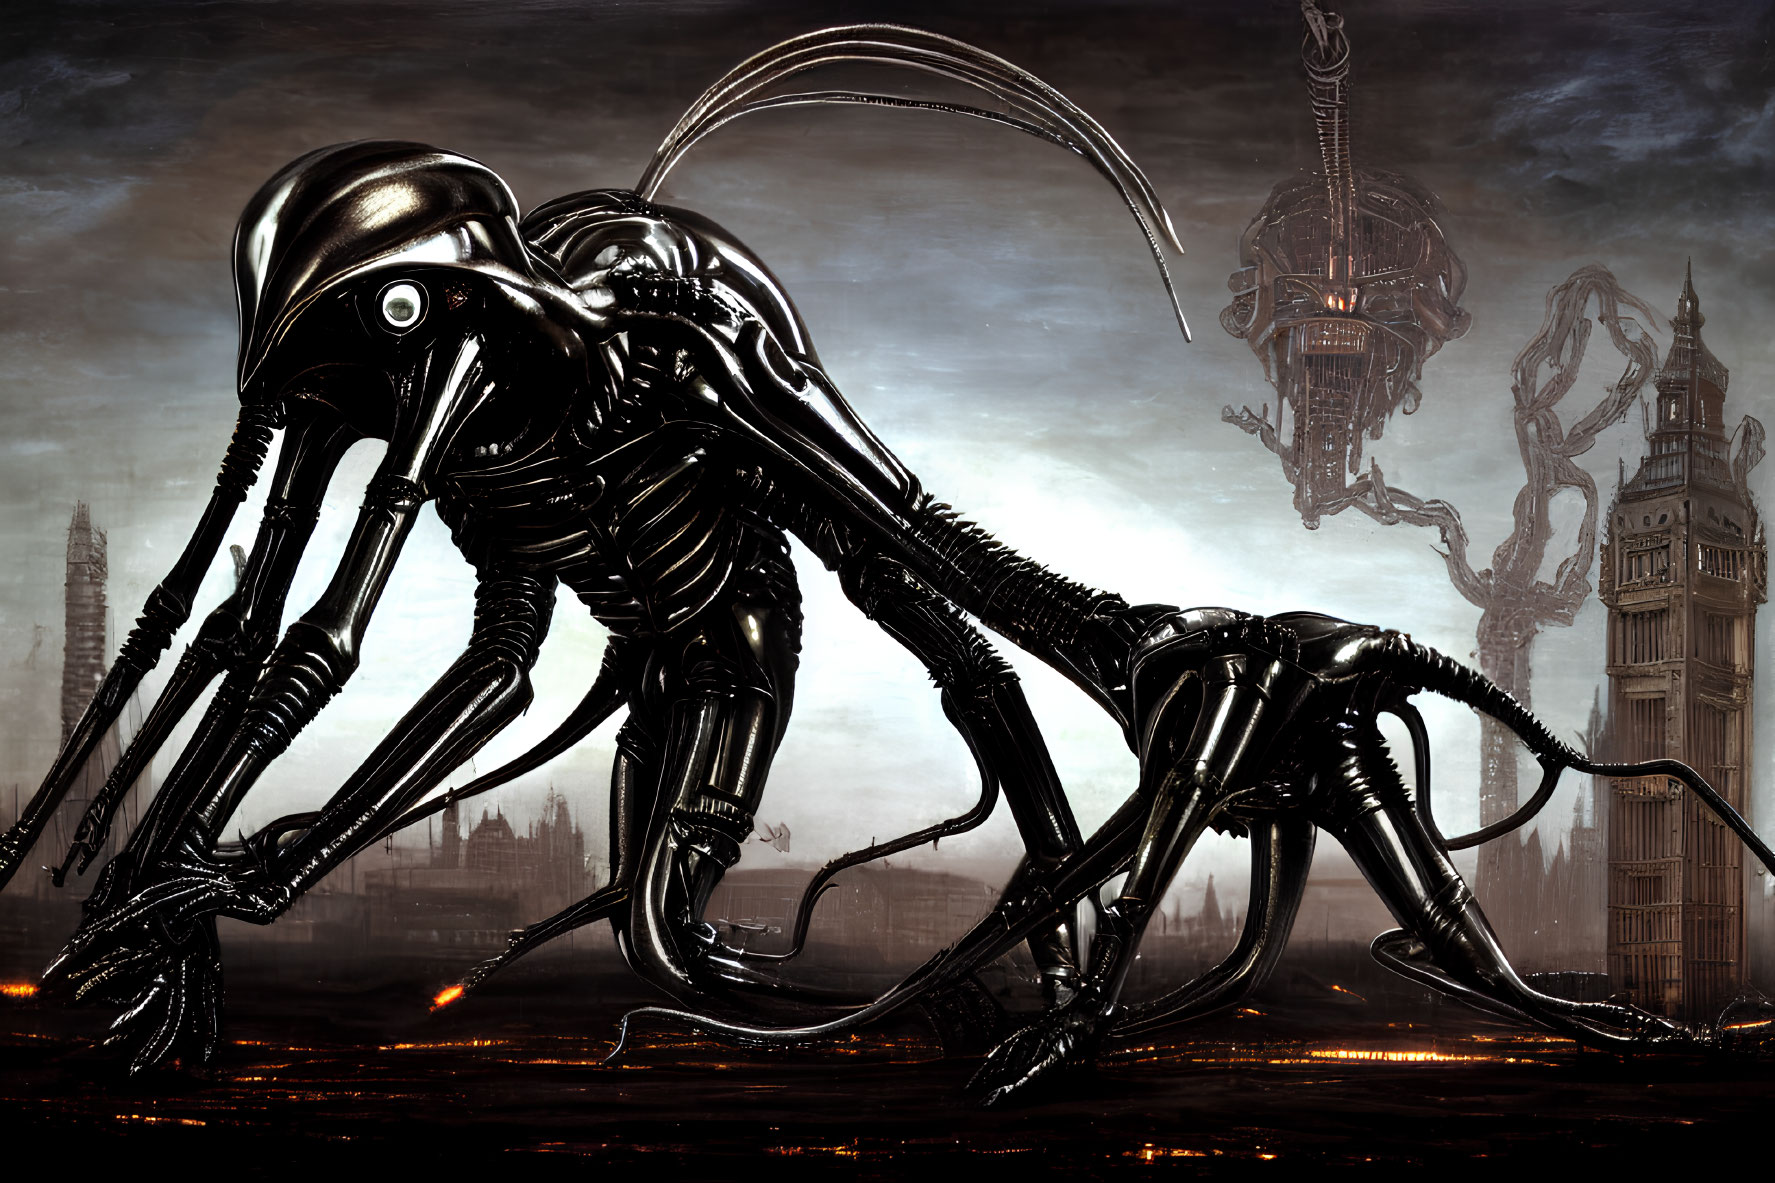 Dystopian scene featuring biomechanical alien creatures and ominous structures